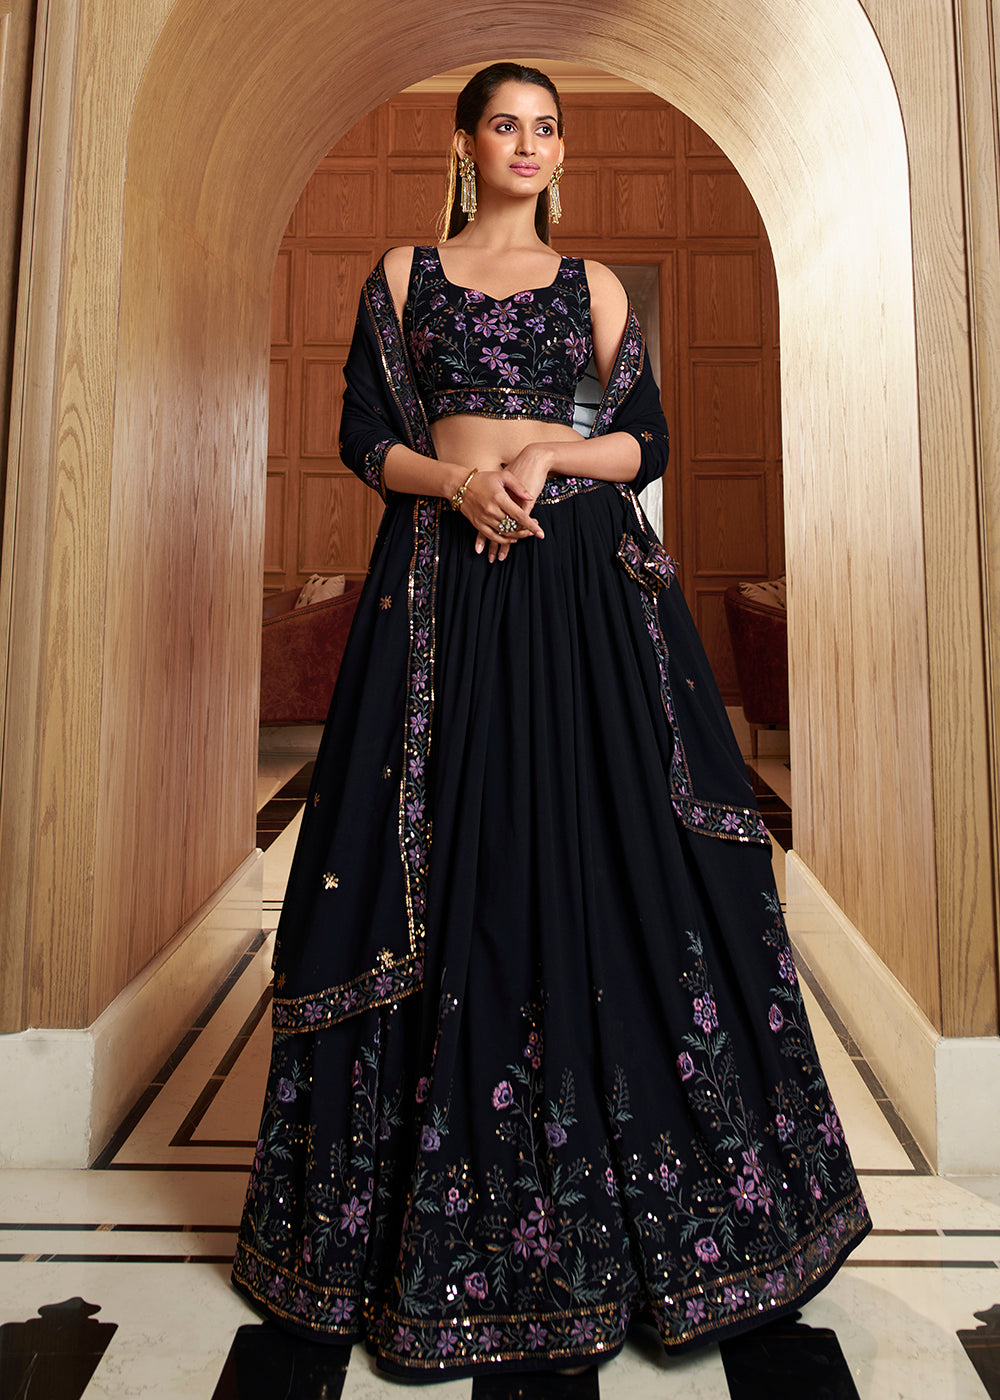 Buy Now Cardinal Navy Blue Floral Embroidered Designer Lehenga Choli Online in USA, UK, Canada & Worldwide at Empress Clothing. 